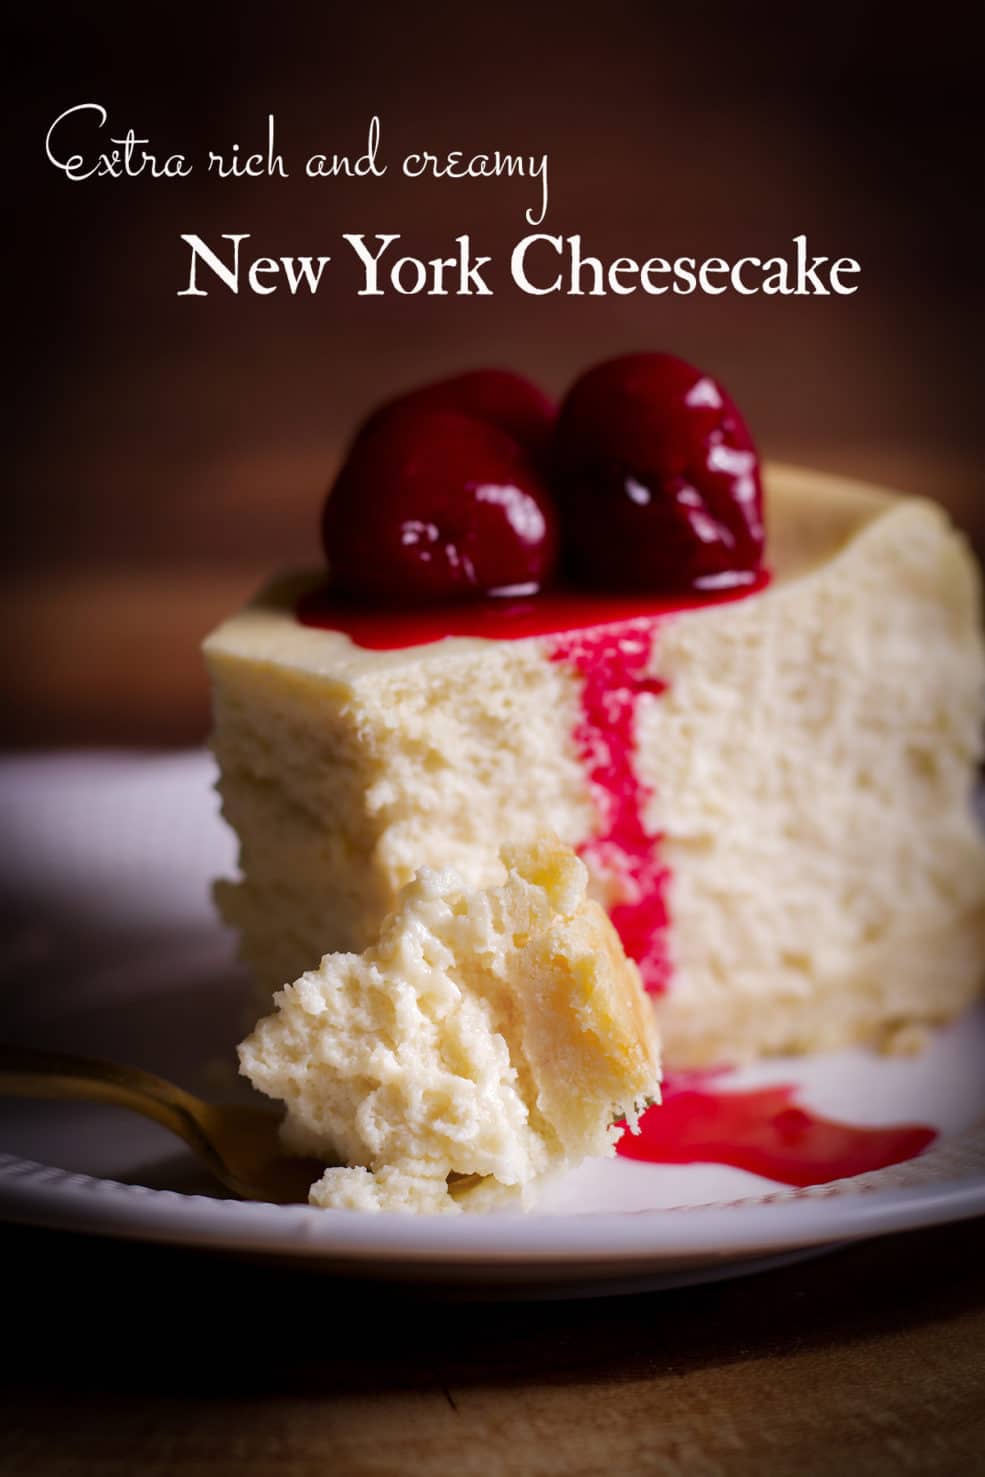 A thick slice of New York Cheesecake with cherry sauce on top on a white plate with a gold fork.